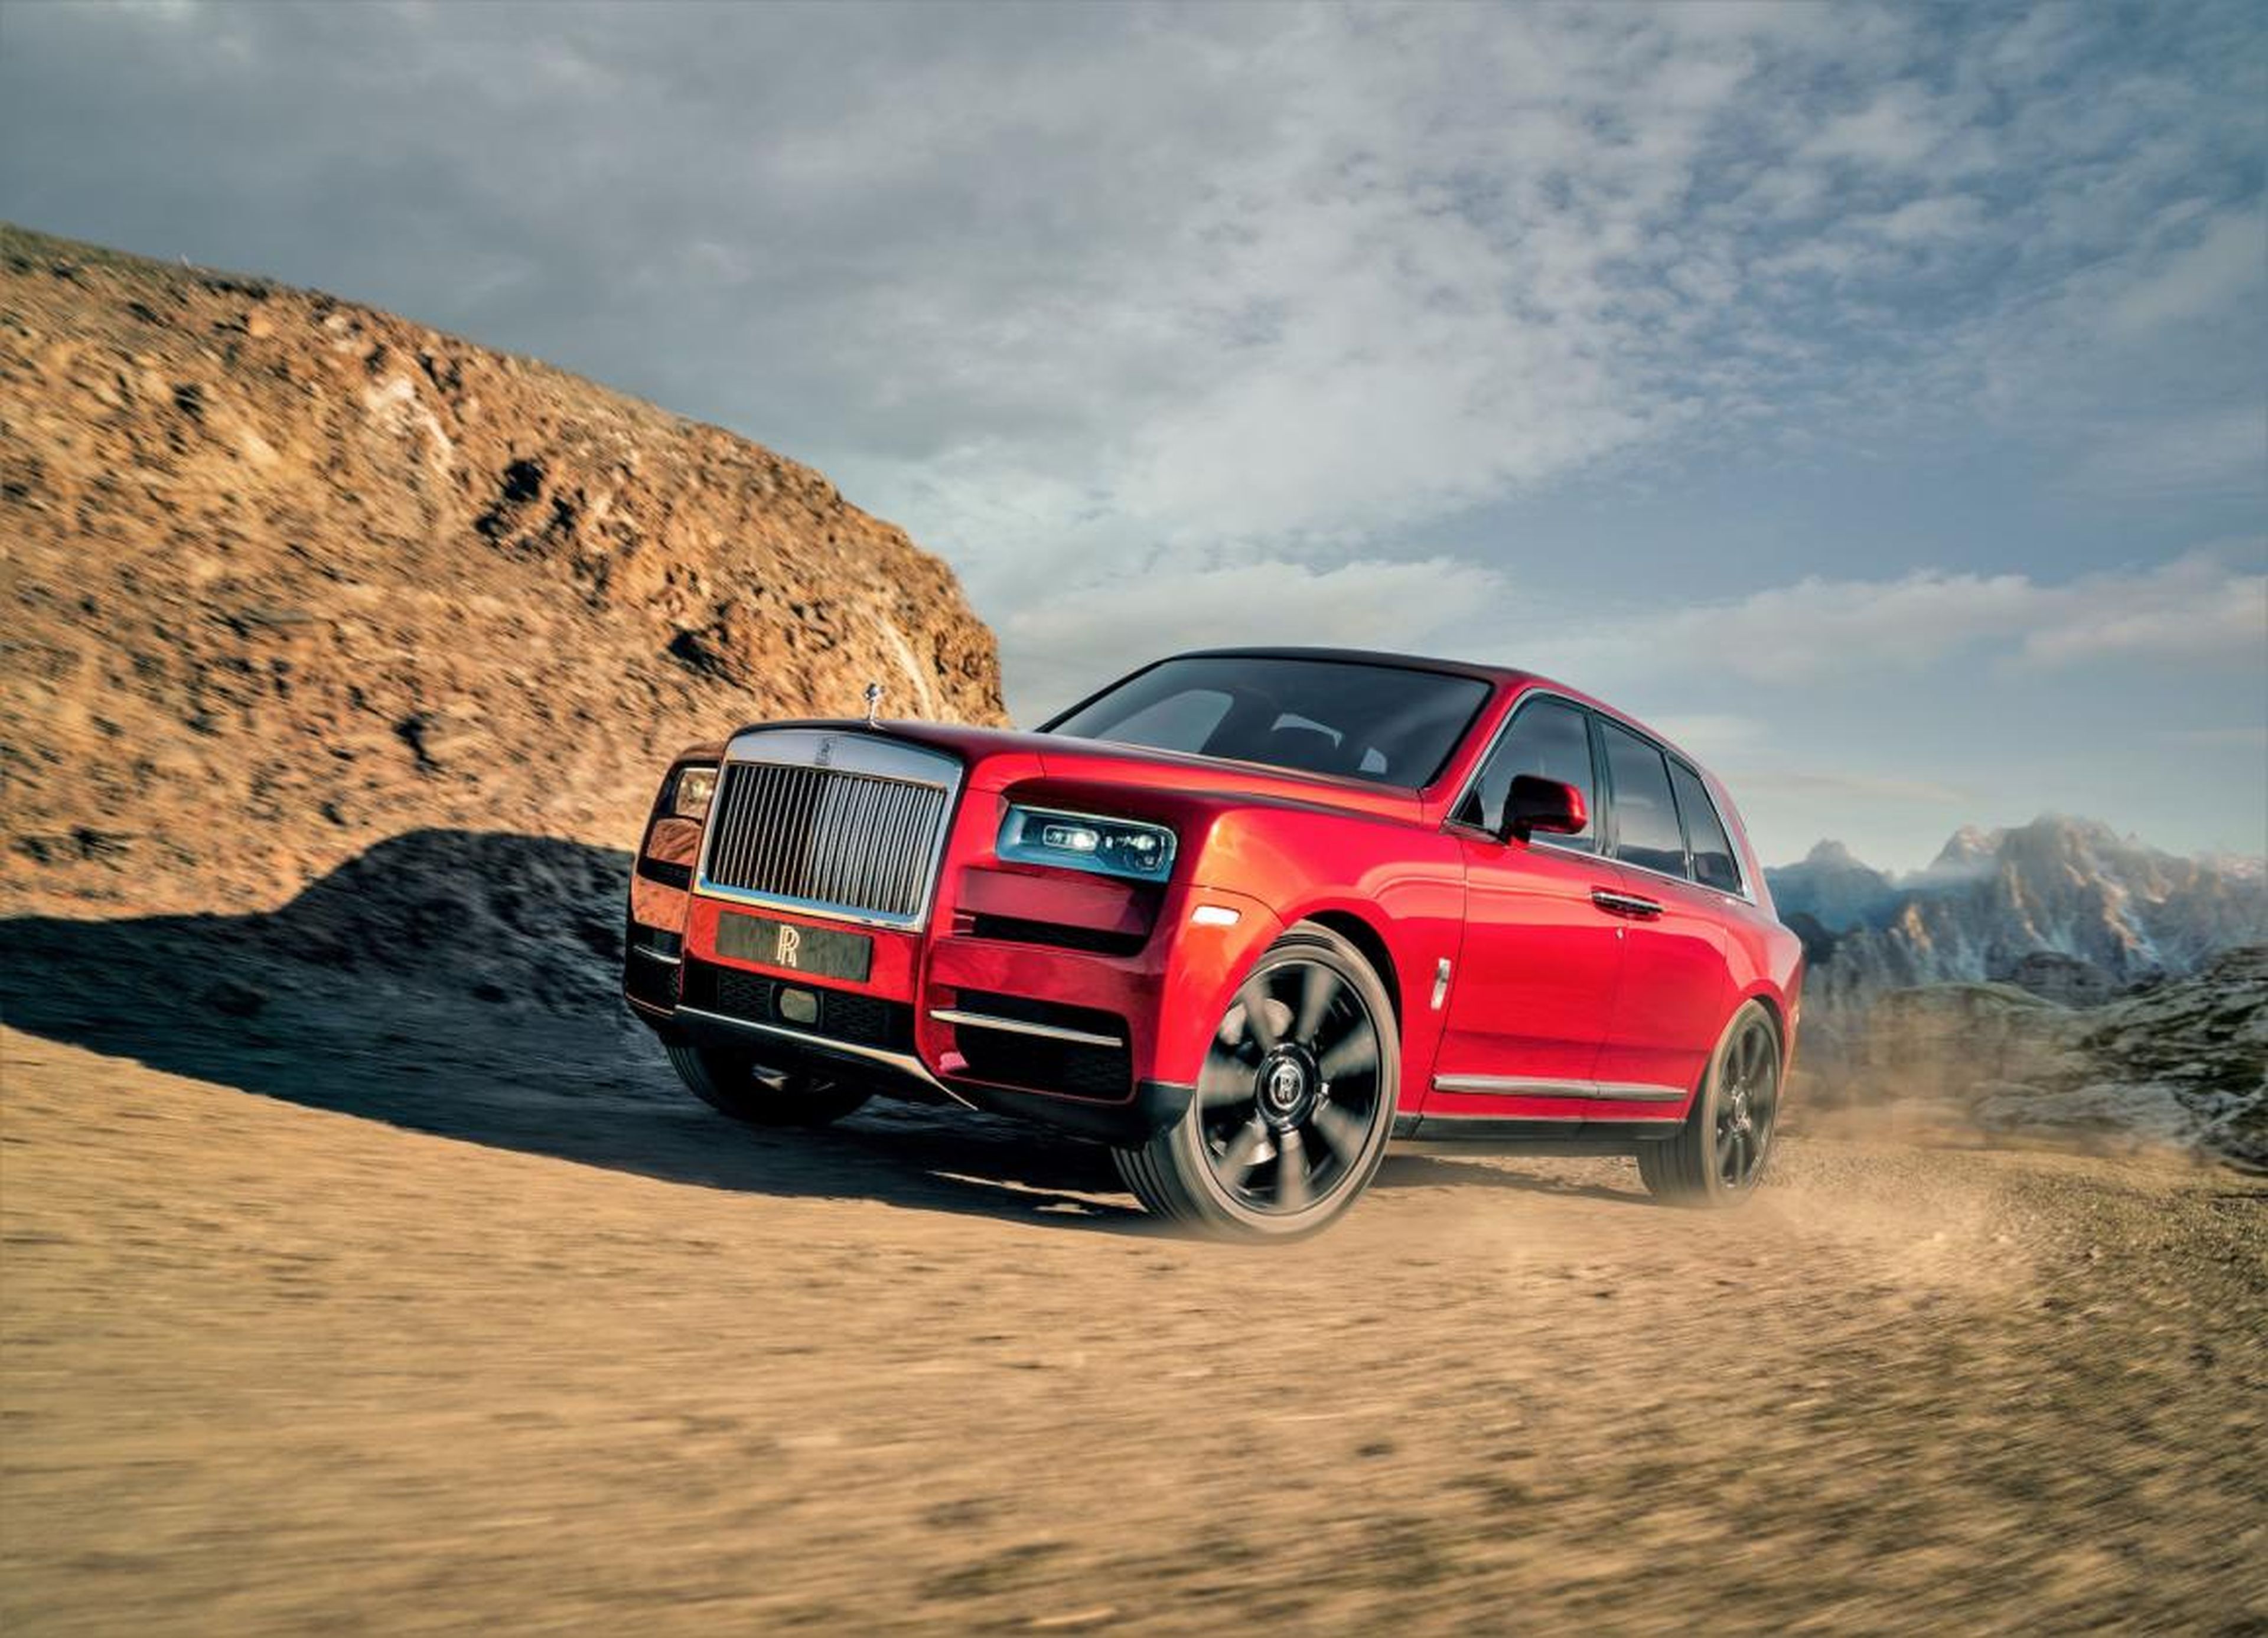 Rolls-Royce will join the SUV game in 2019 with the new Cullinan.